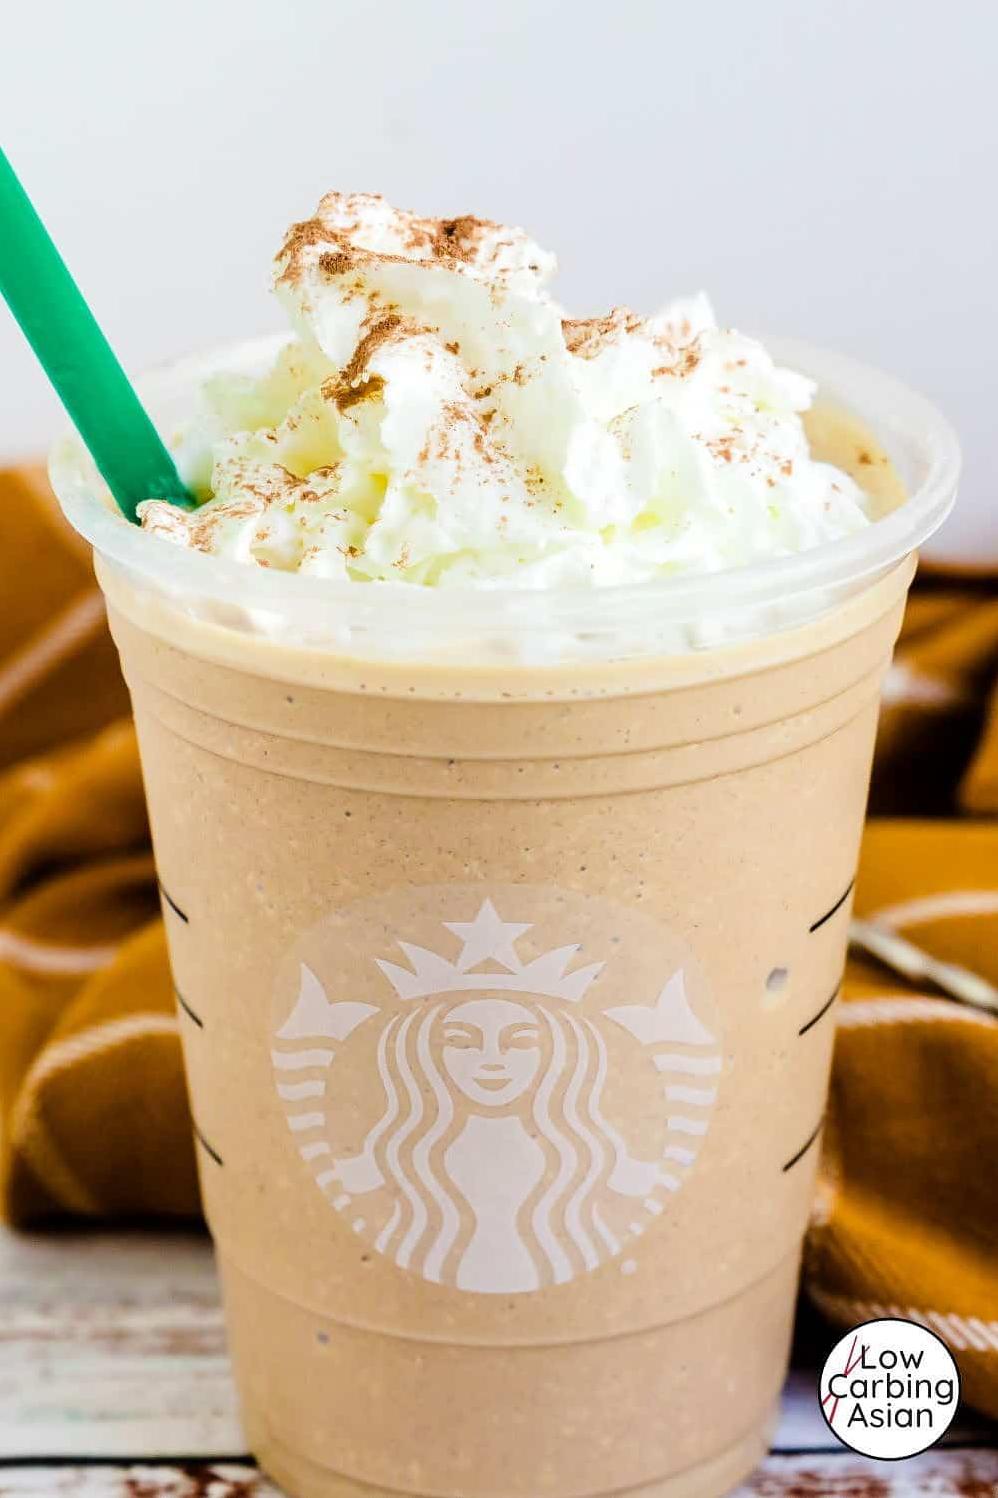  One sip of this mocha frappuccino and you'll be in coffee heaven.